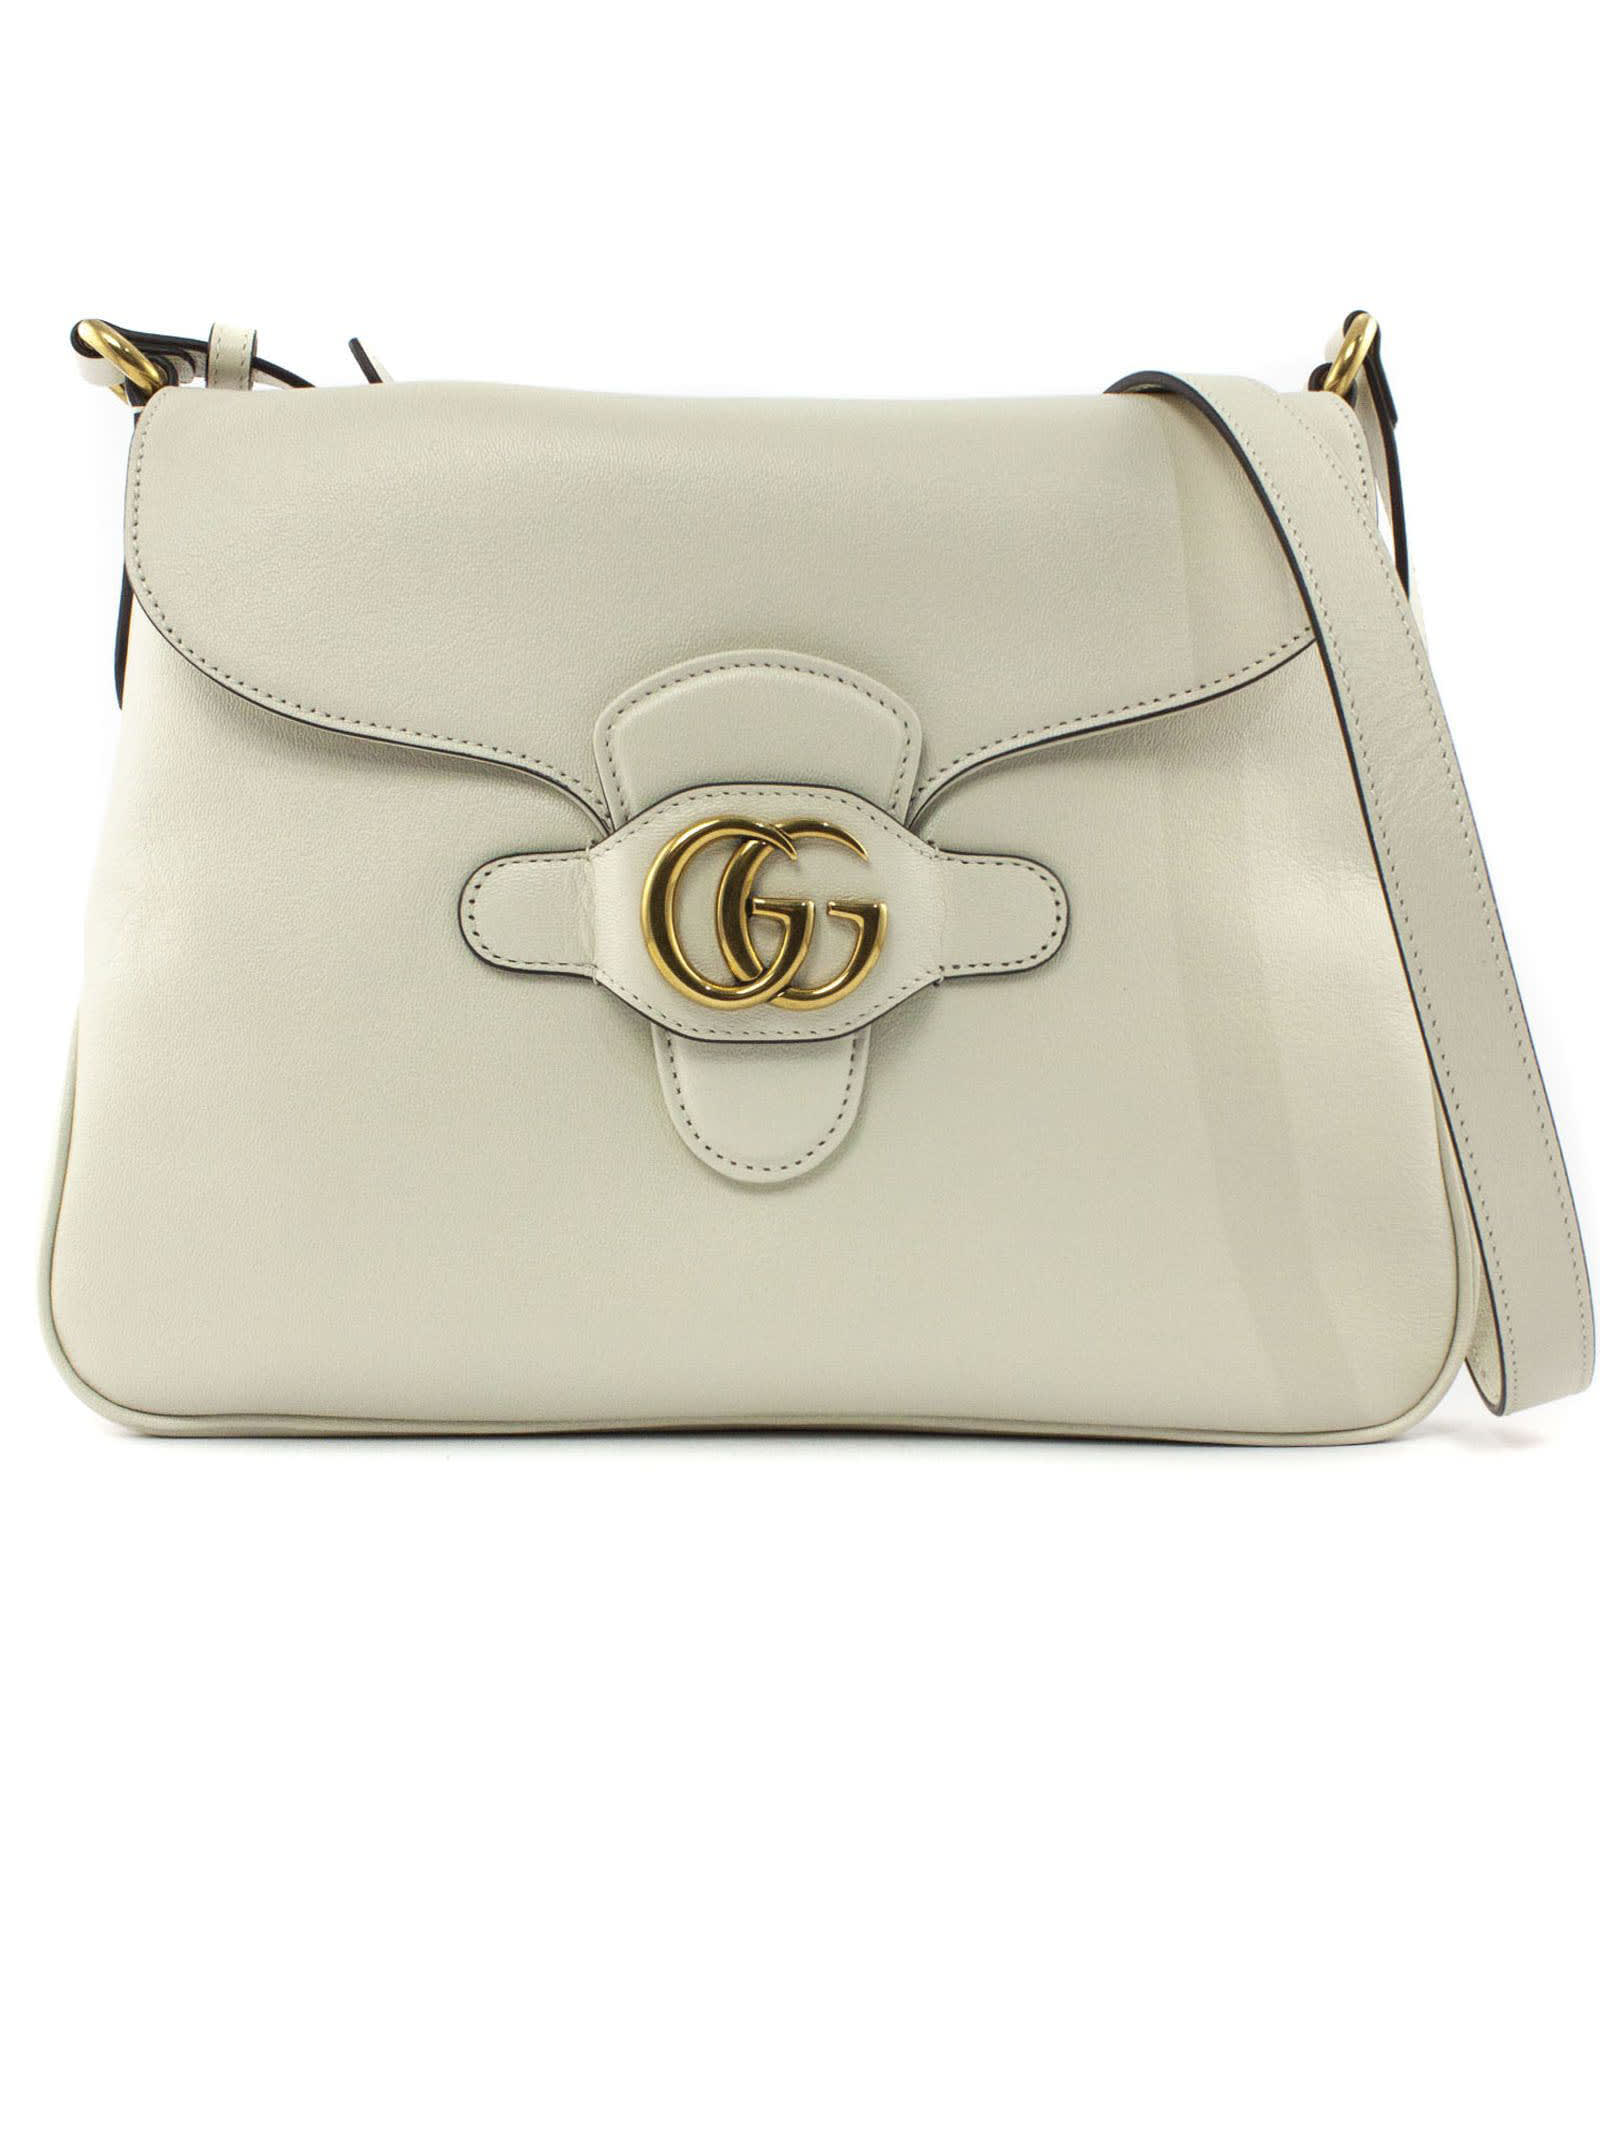 Gucci White Leather Messenger Bag